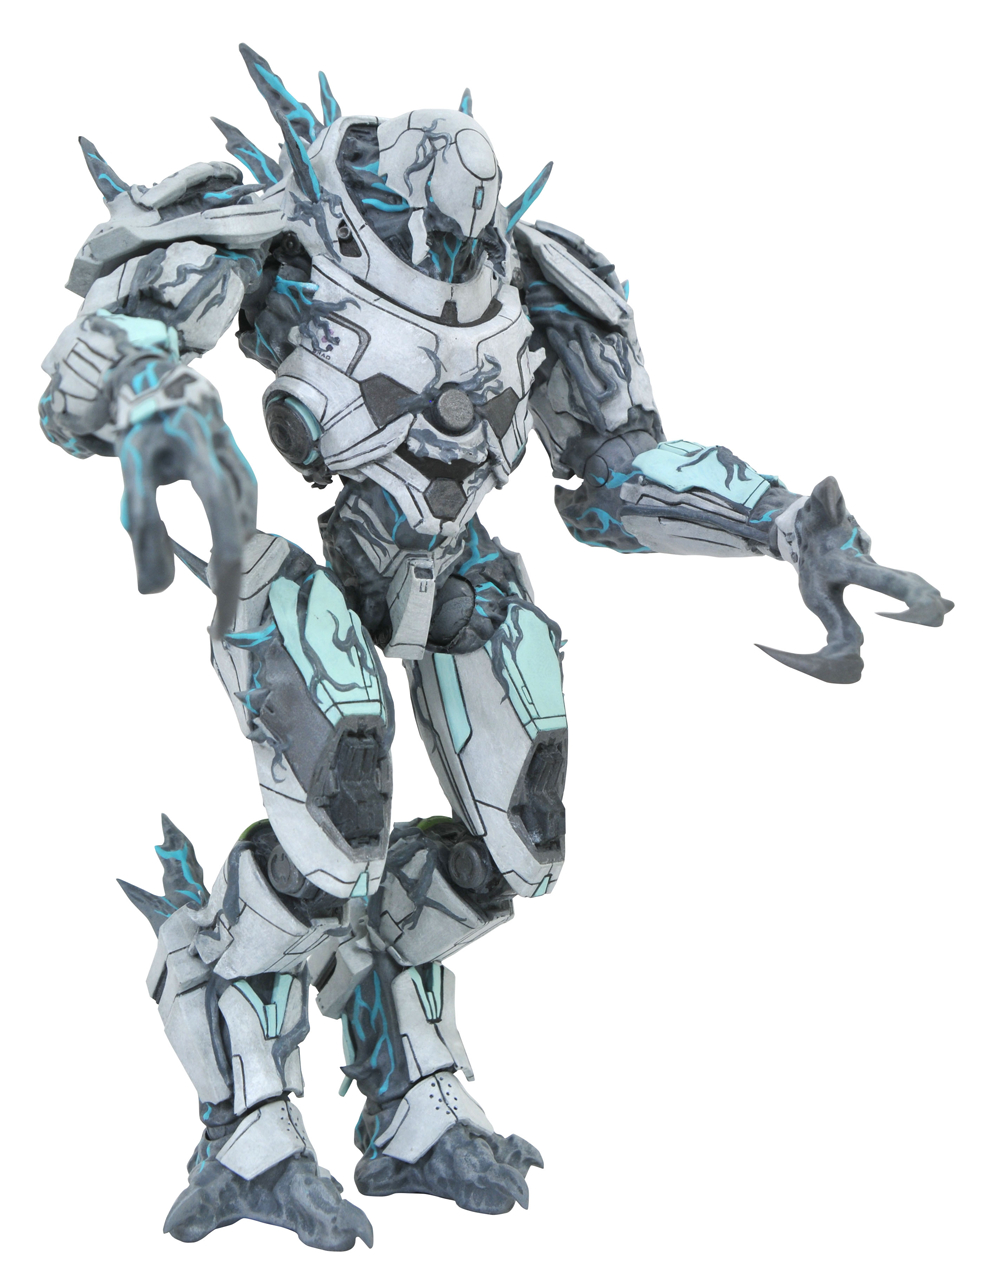 PACIFIC RIM 2 SELECT SERIES 3 DRONE AF